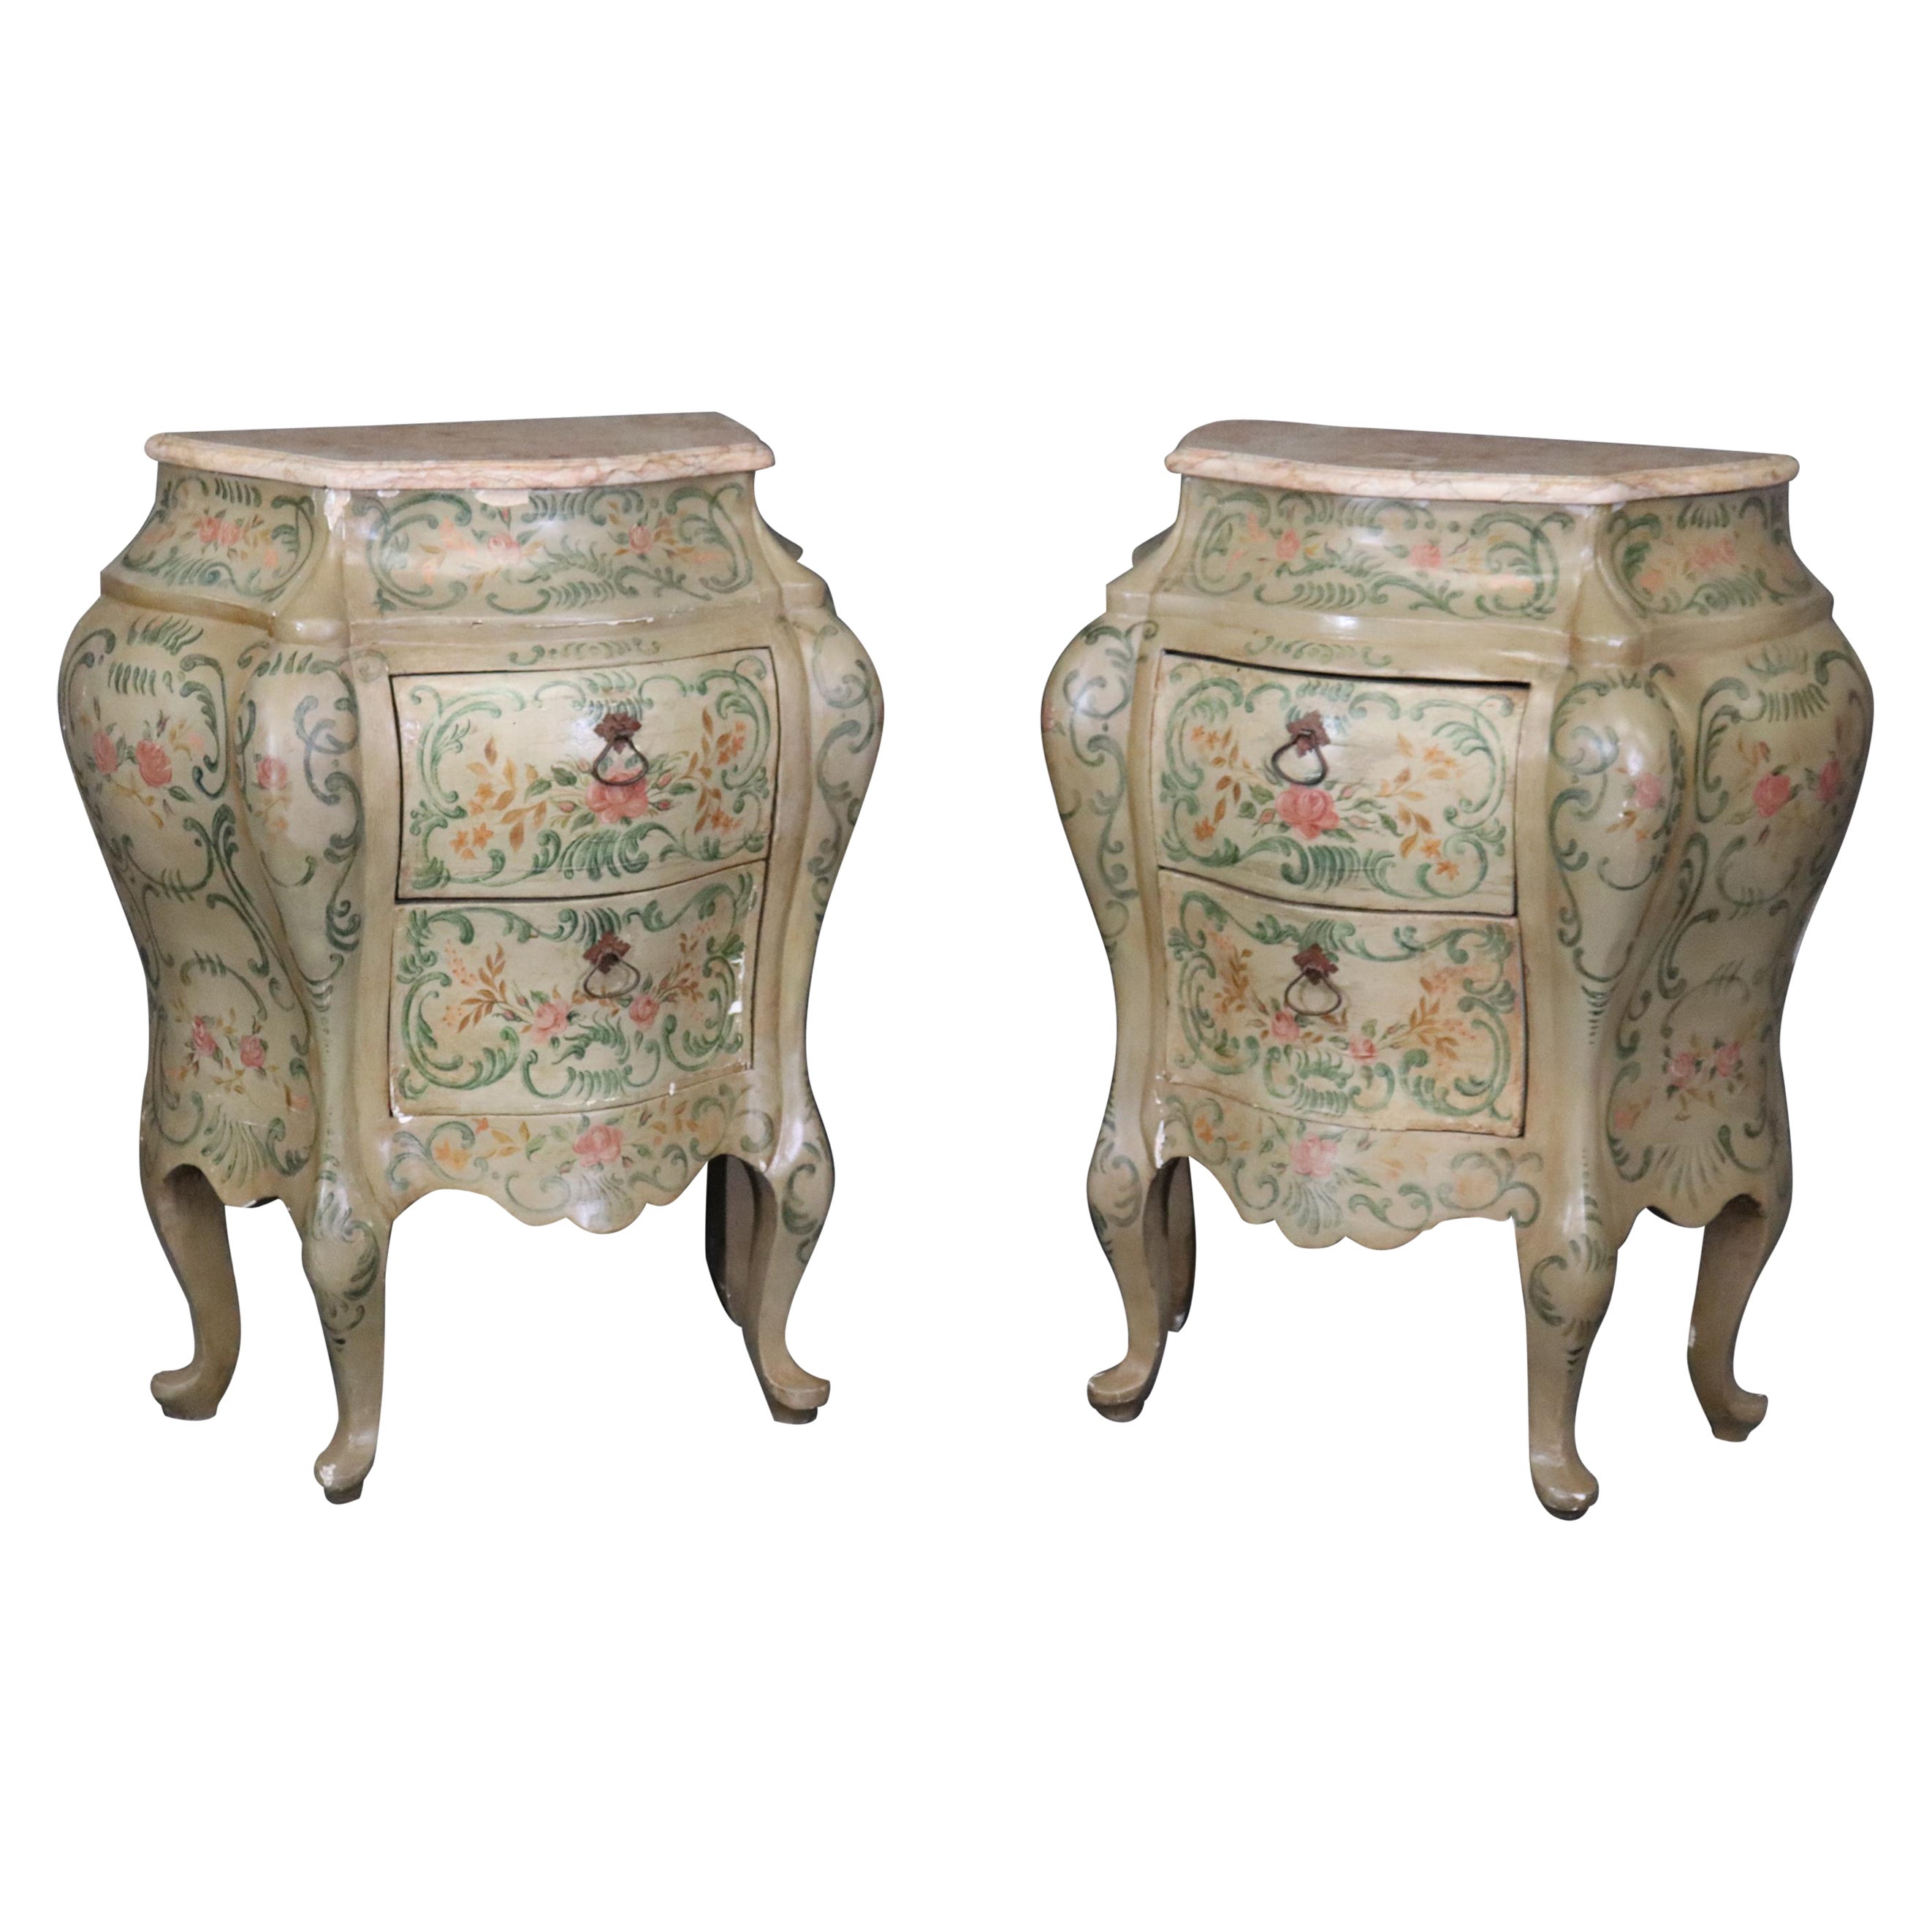 Rare Pair 18th Century Venetian Paint Decorated Marble Top Commodes Nightstands 